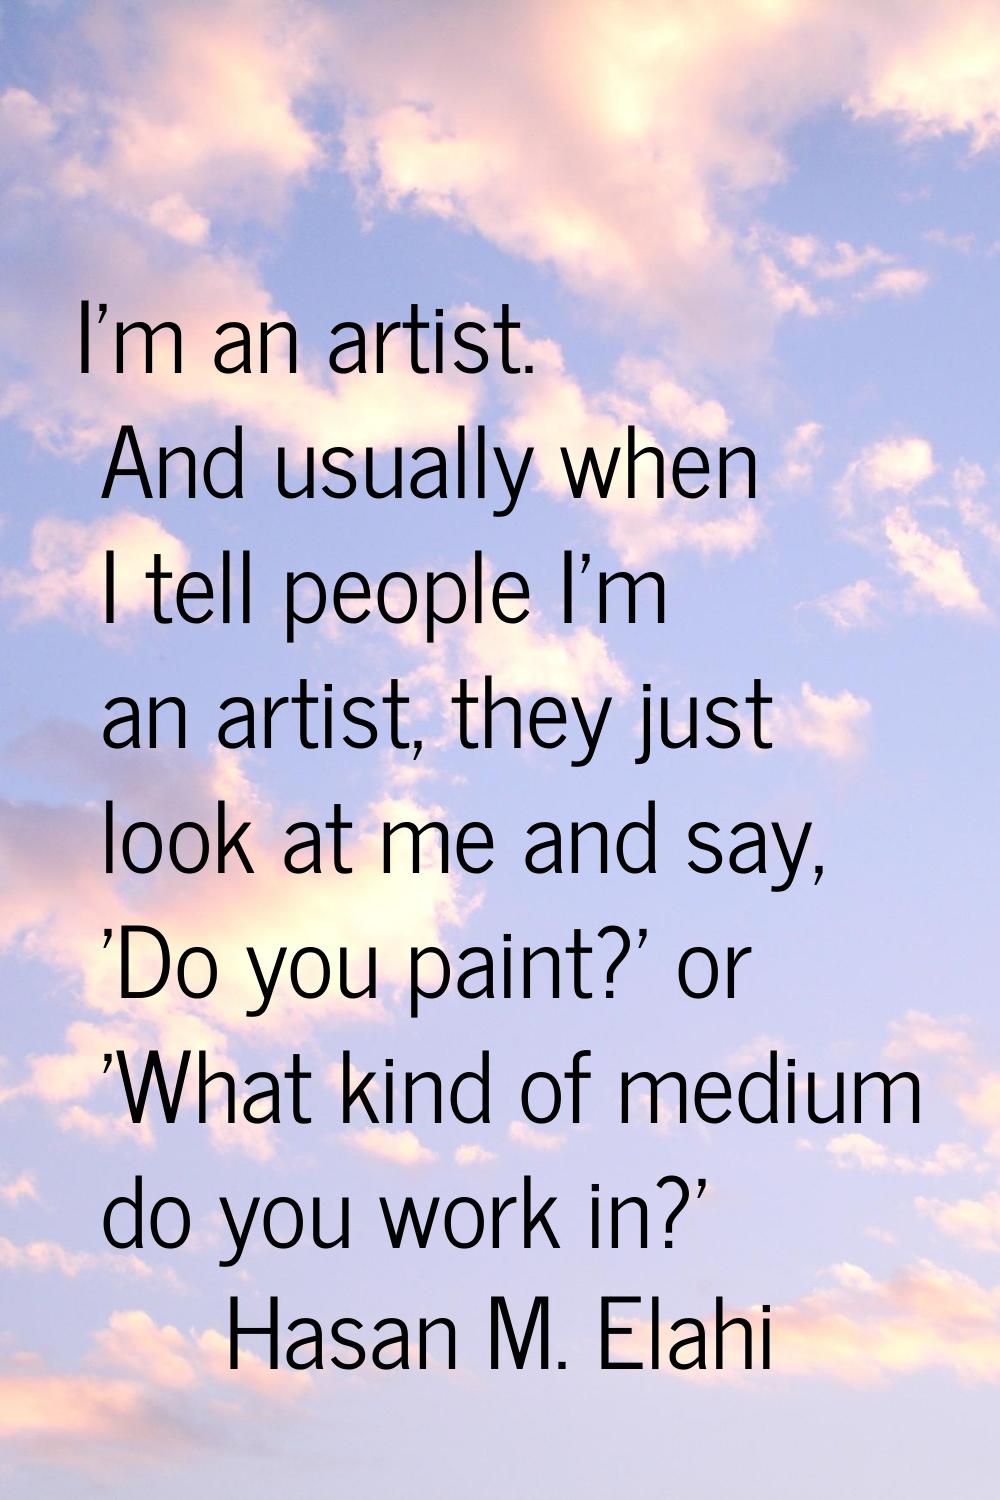 I'm an artist. And usually when I tell people I'm an artist, they just look at me and say, 'Do you 